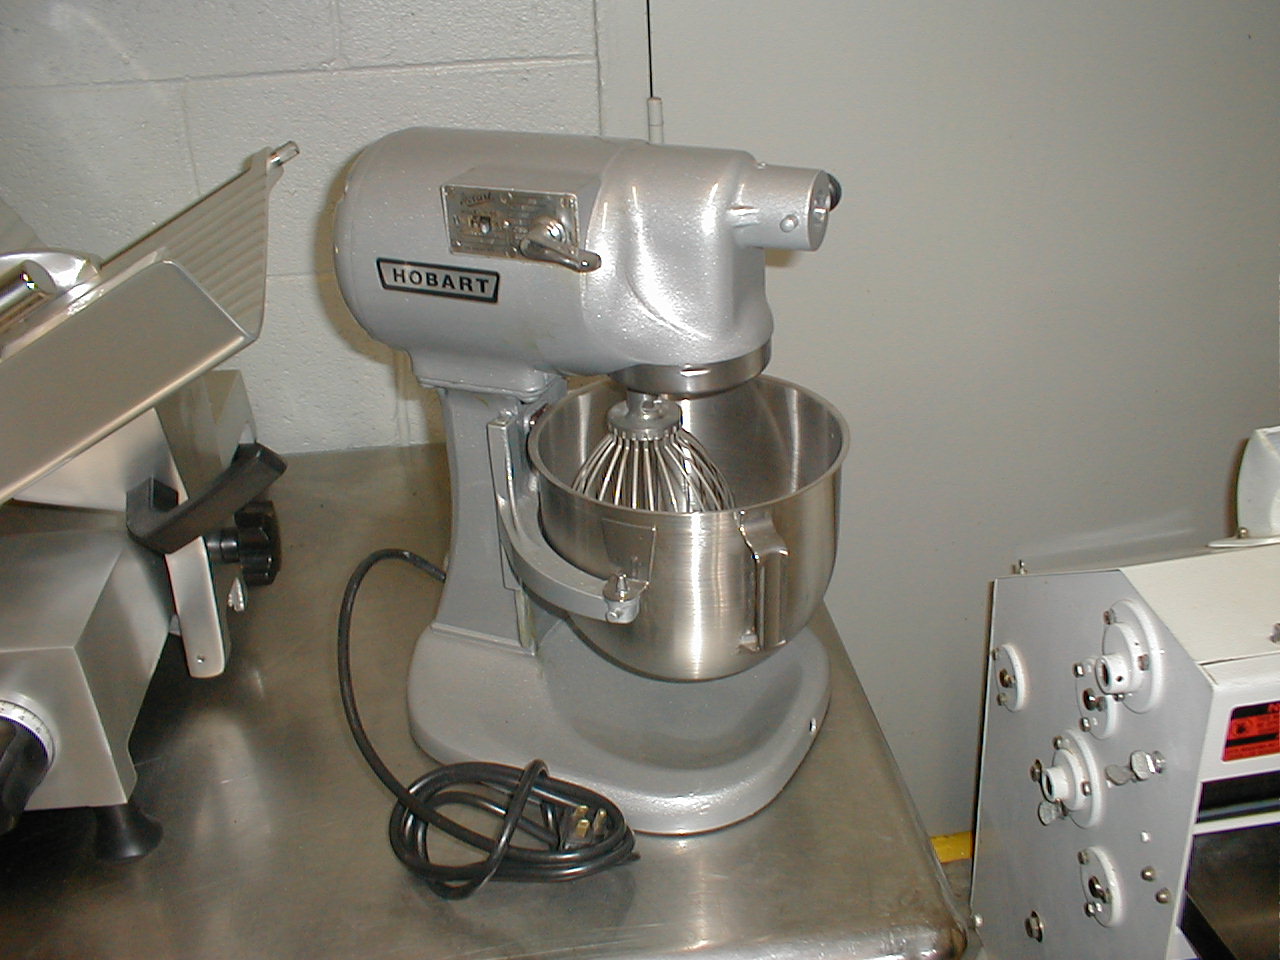 Hobart N-50 Mixer Refurbished Hobart N-50 mixer refurbished to factory condition. Our Refurbished units are guaranteed with a warranty. All of our refurbished Hobart Mixers are in pristine condition. 